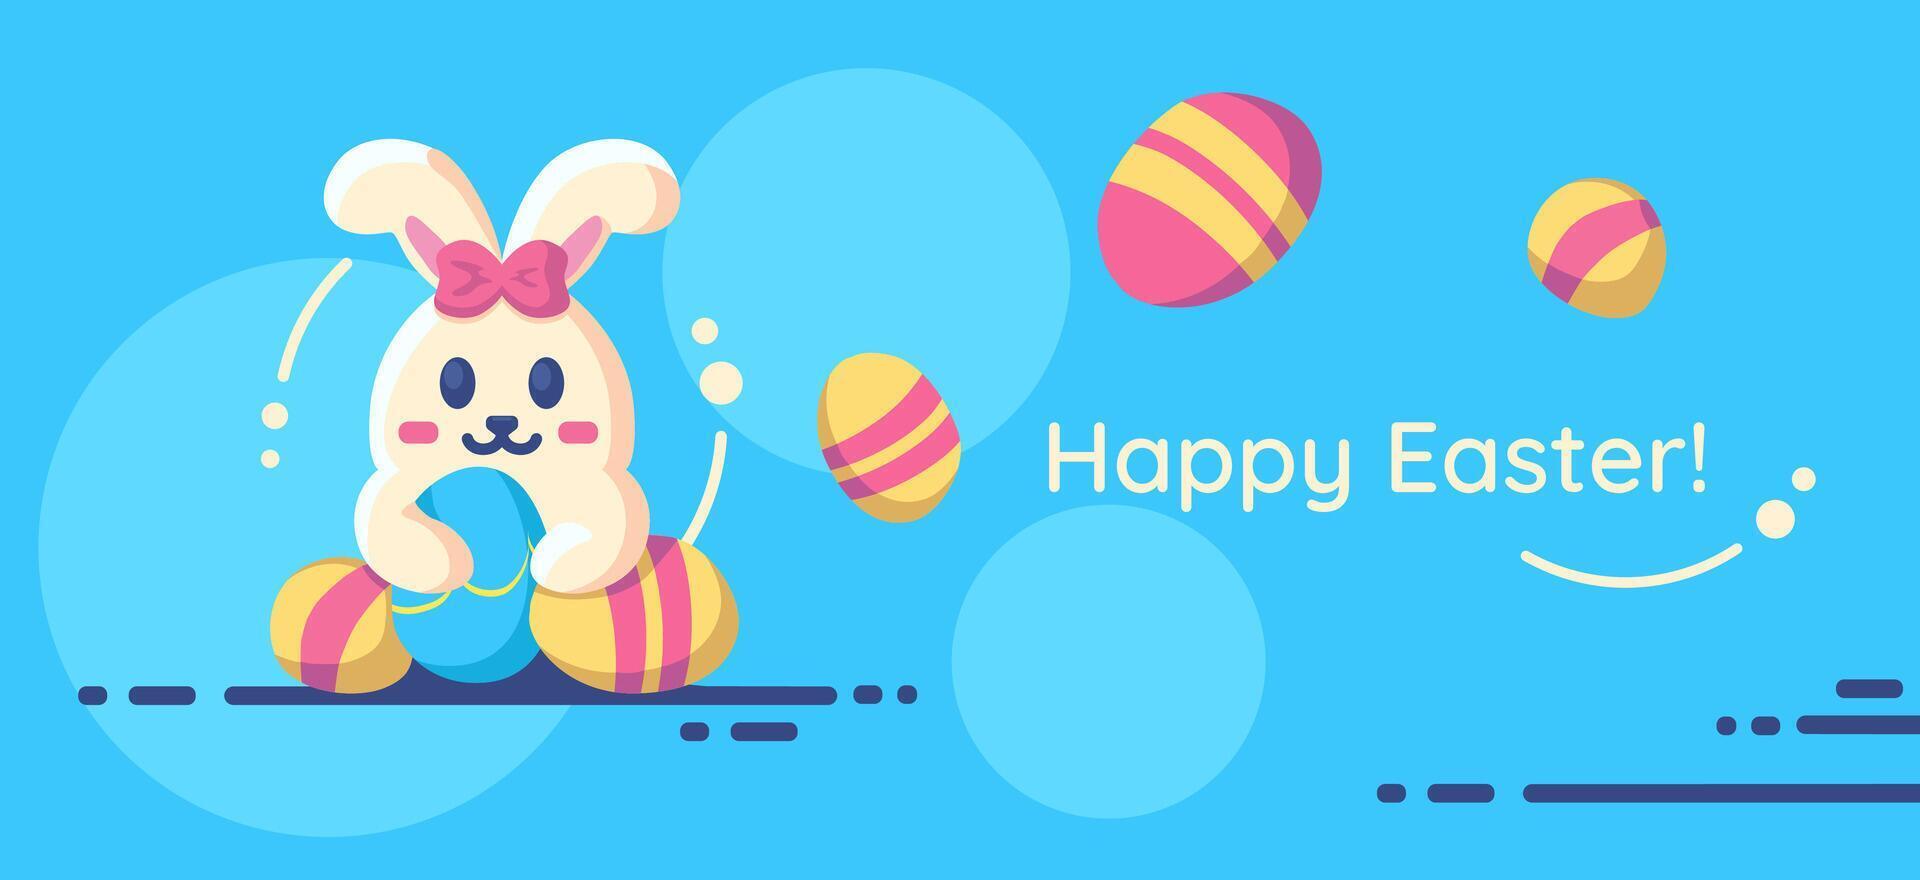 Happy Easter banner with cute flat rabbit with Easter eggs, invitation, greeting for a springtime holiday. Vector illustration.